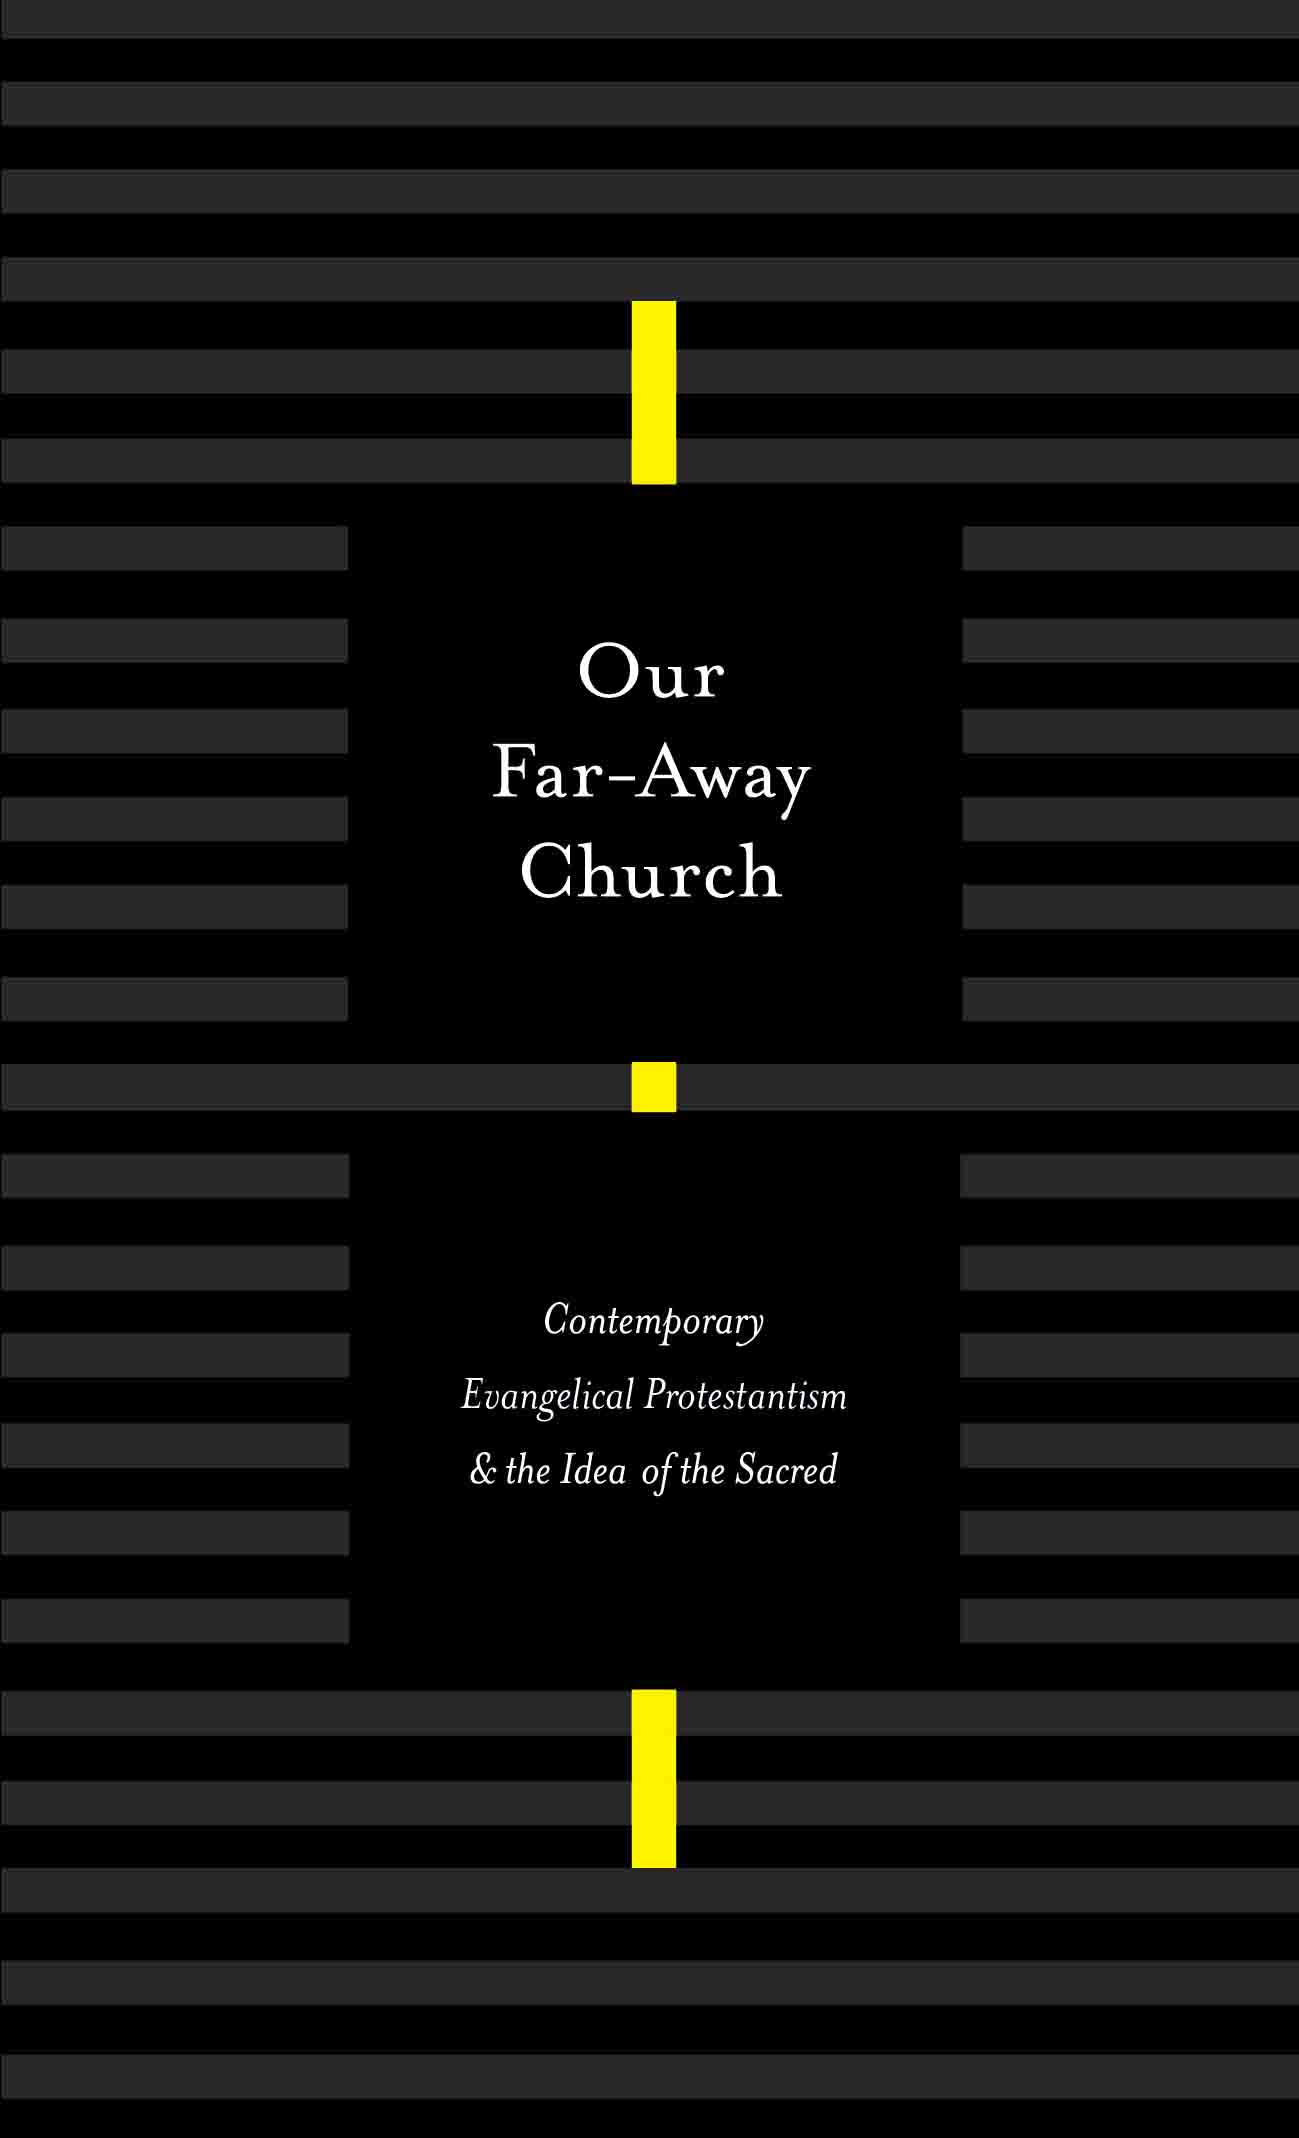 A Distant Ecclesiology